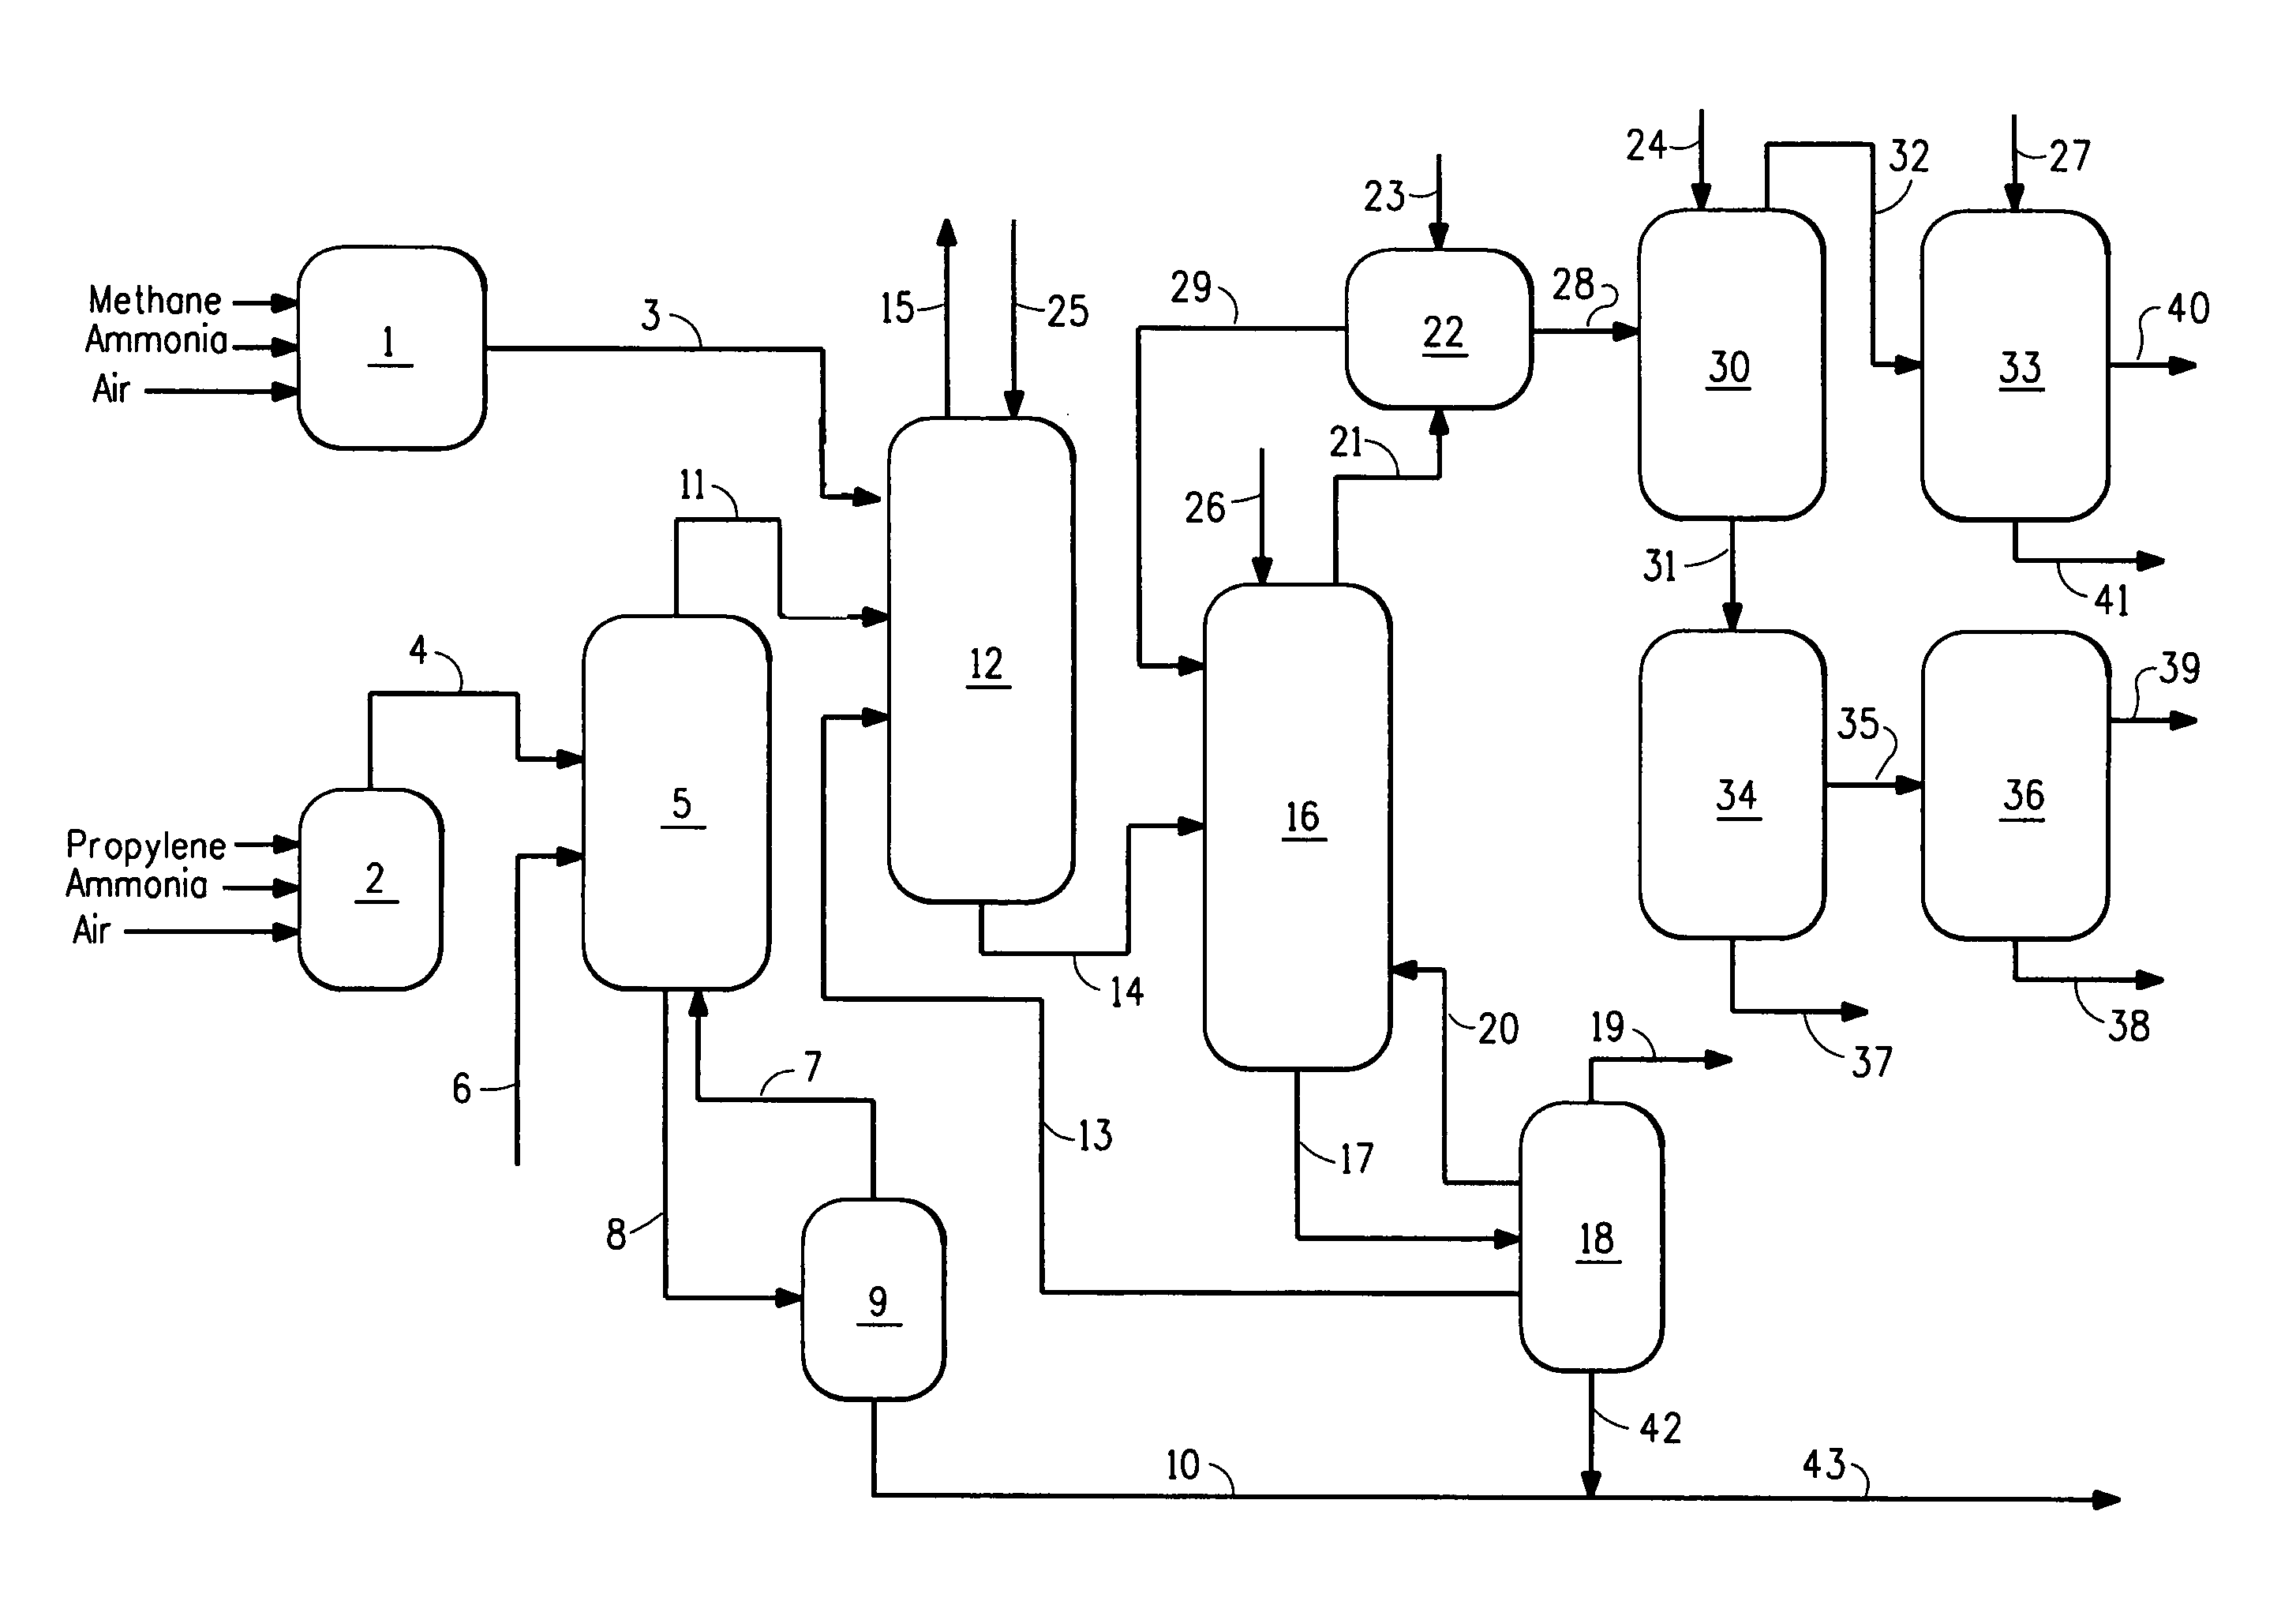 Process to C-manufacture acrylonitrile and hydrogen cyanide